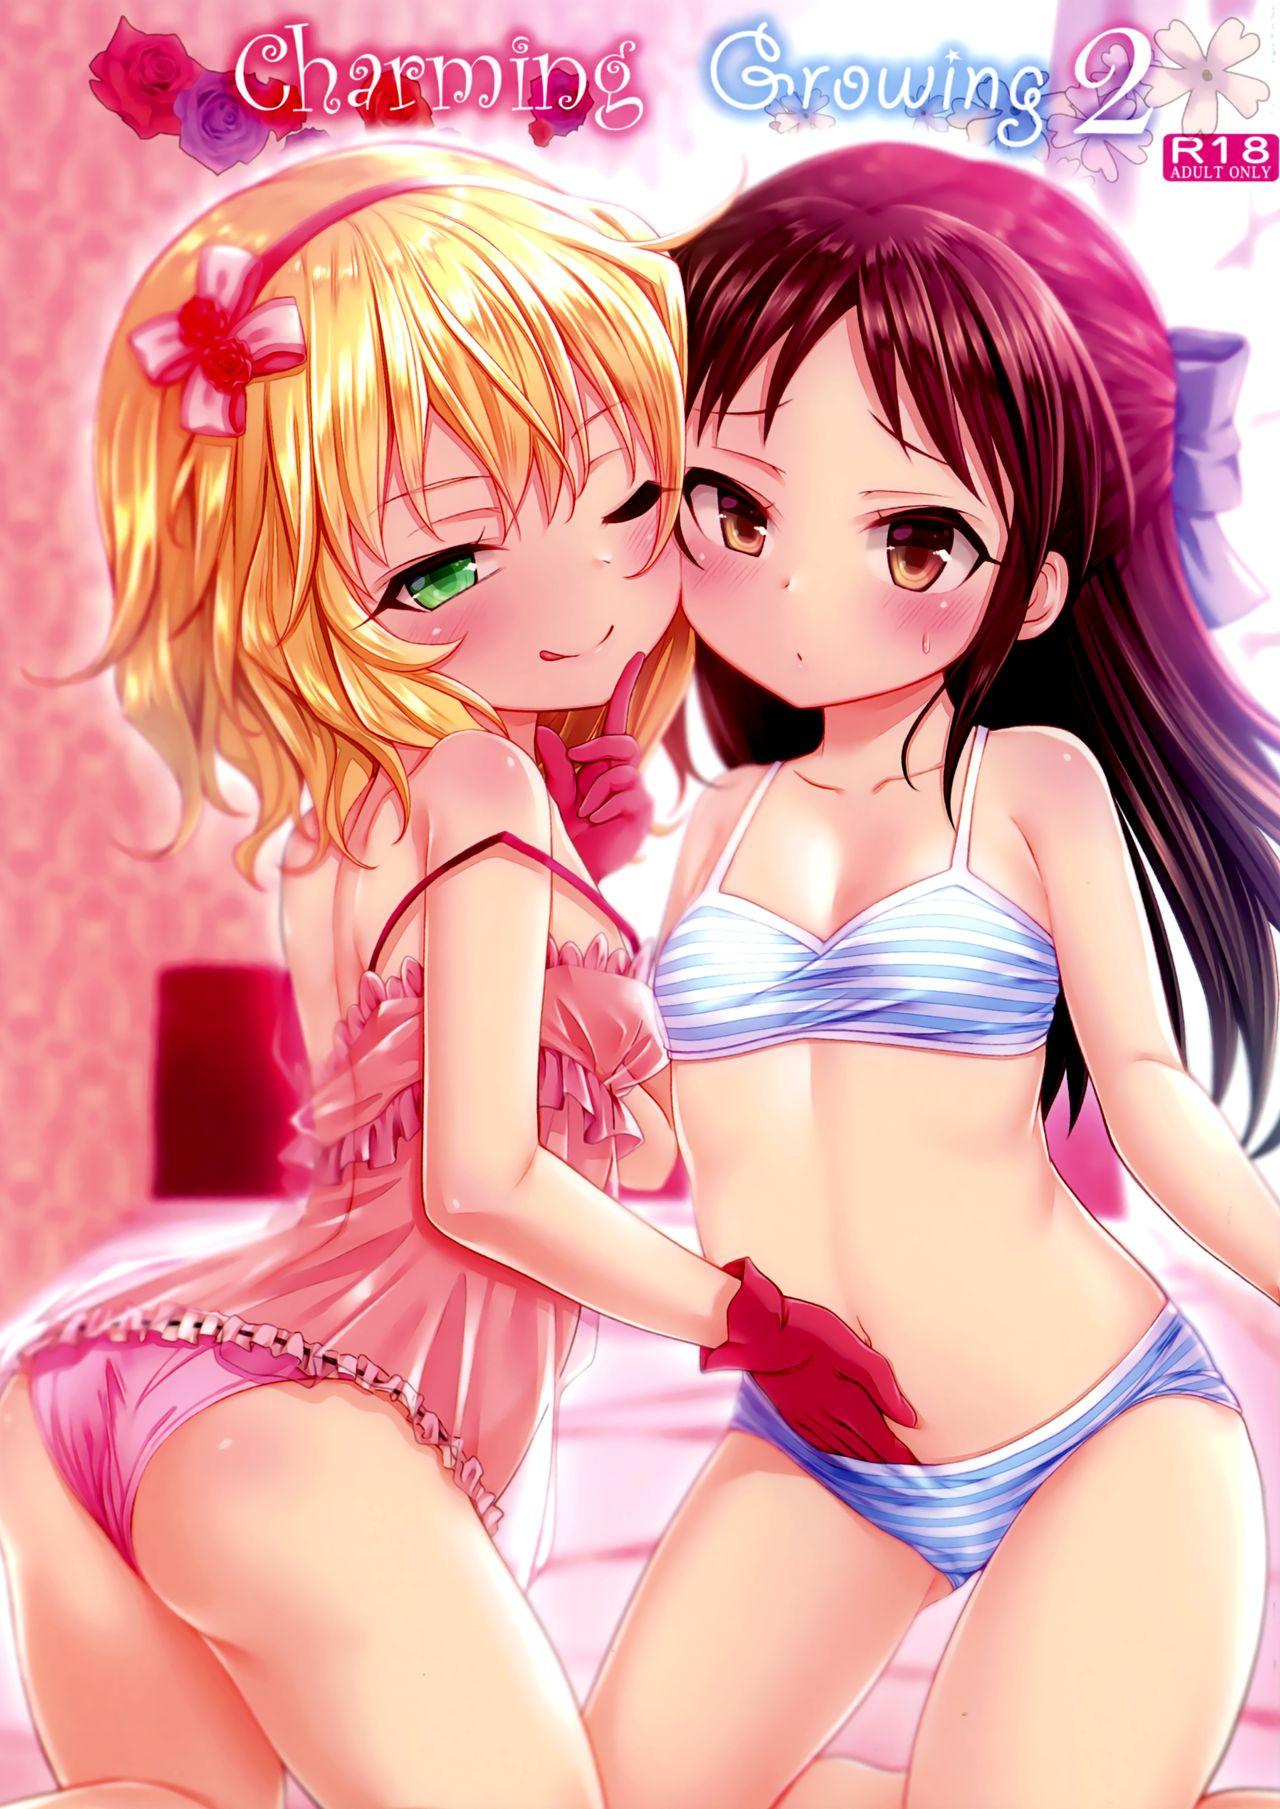 Model Charming Growing 2 - The idolmaster Seduction - Picture 1